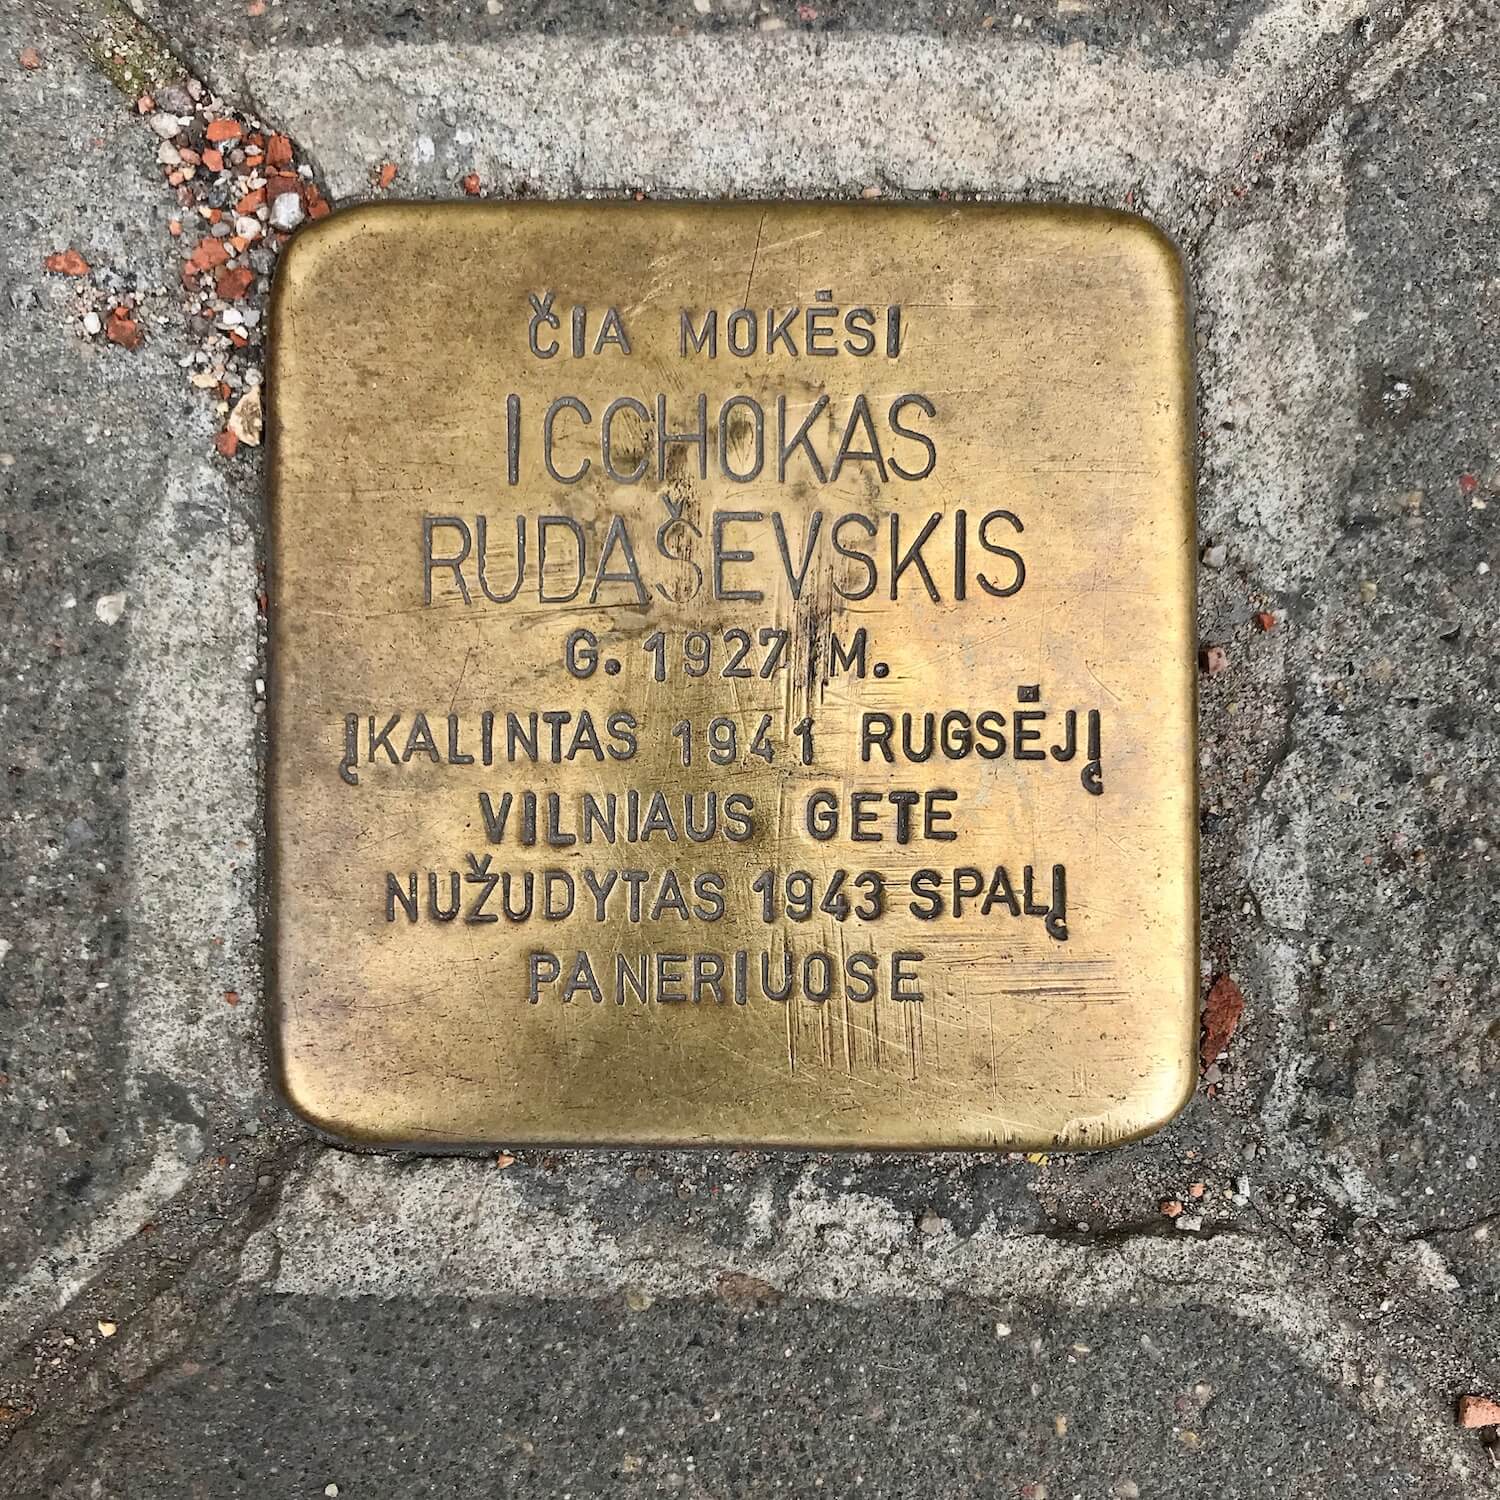 A copper tile on the sidewalk in Vilnius Lithuania remembered a Jewish citizen taken from their home and sent to concentration camps to die. The writing is in Lithuanian.